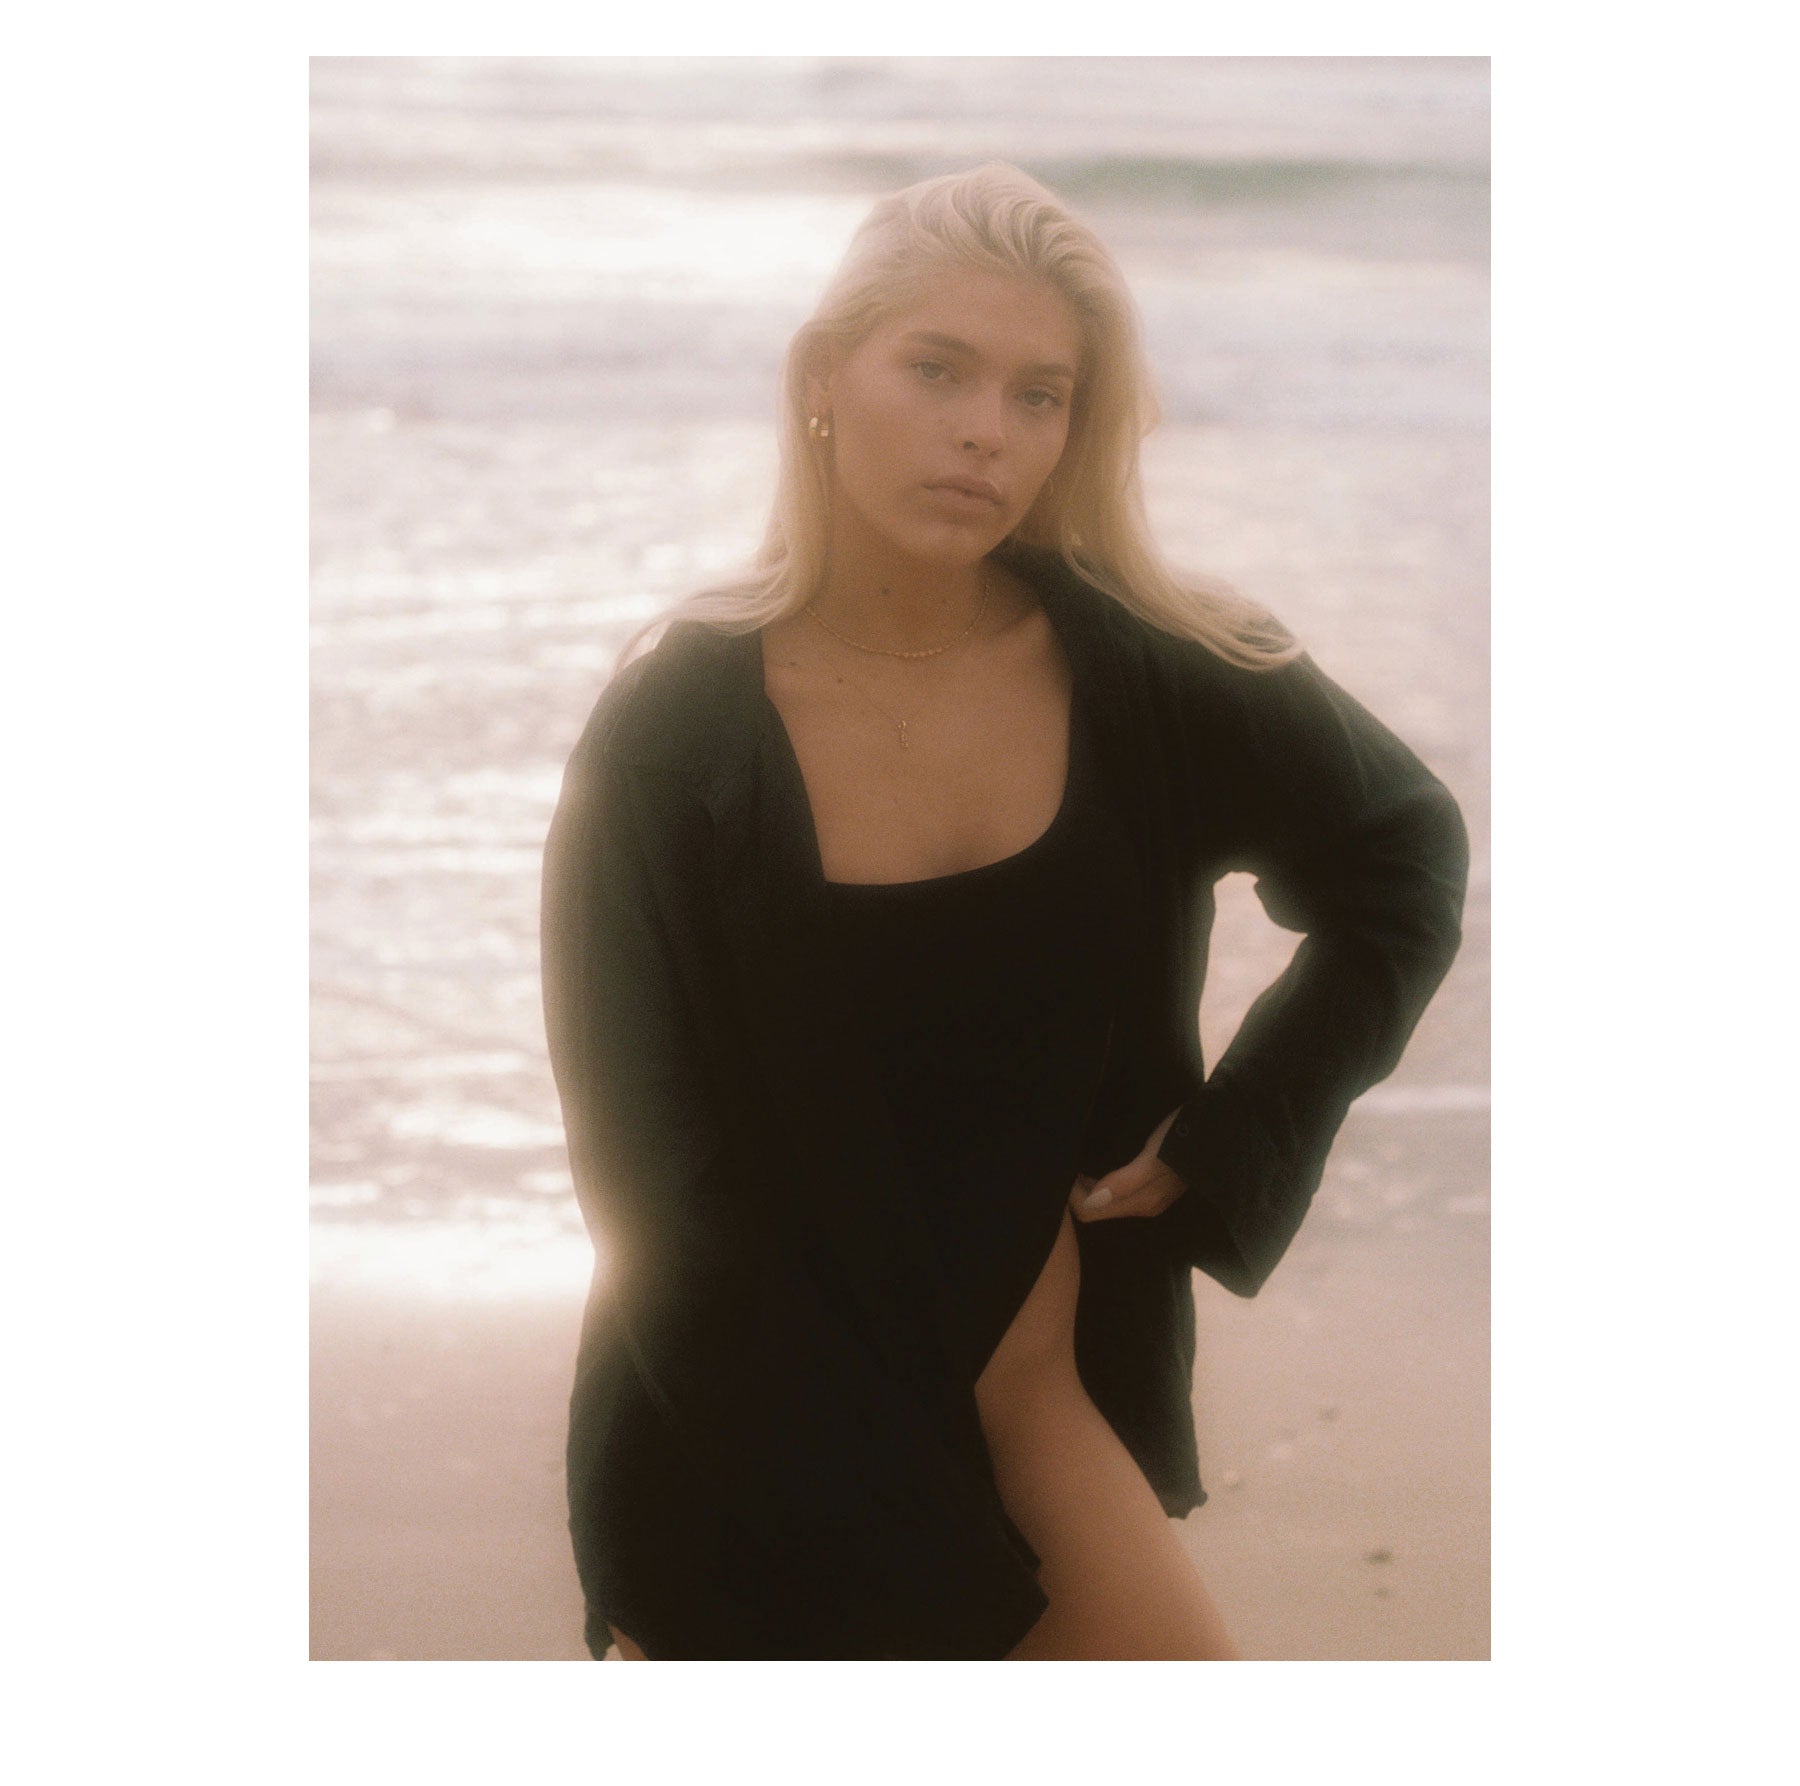 Campaign Image Of Model On Beach